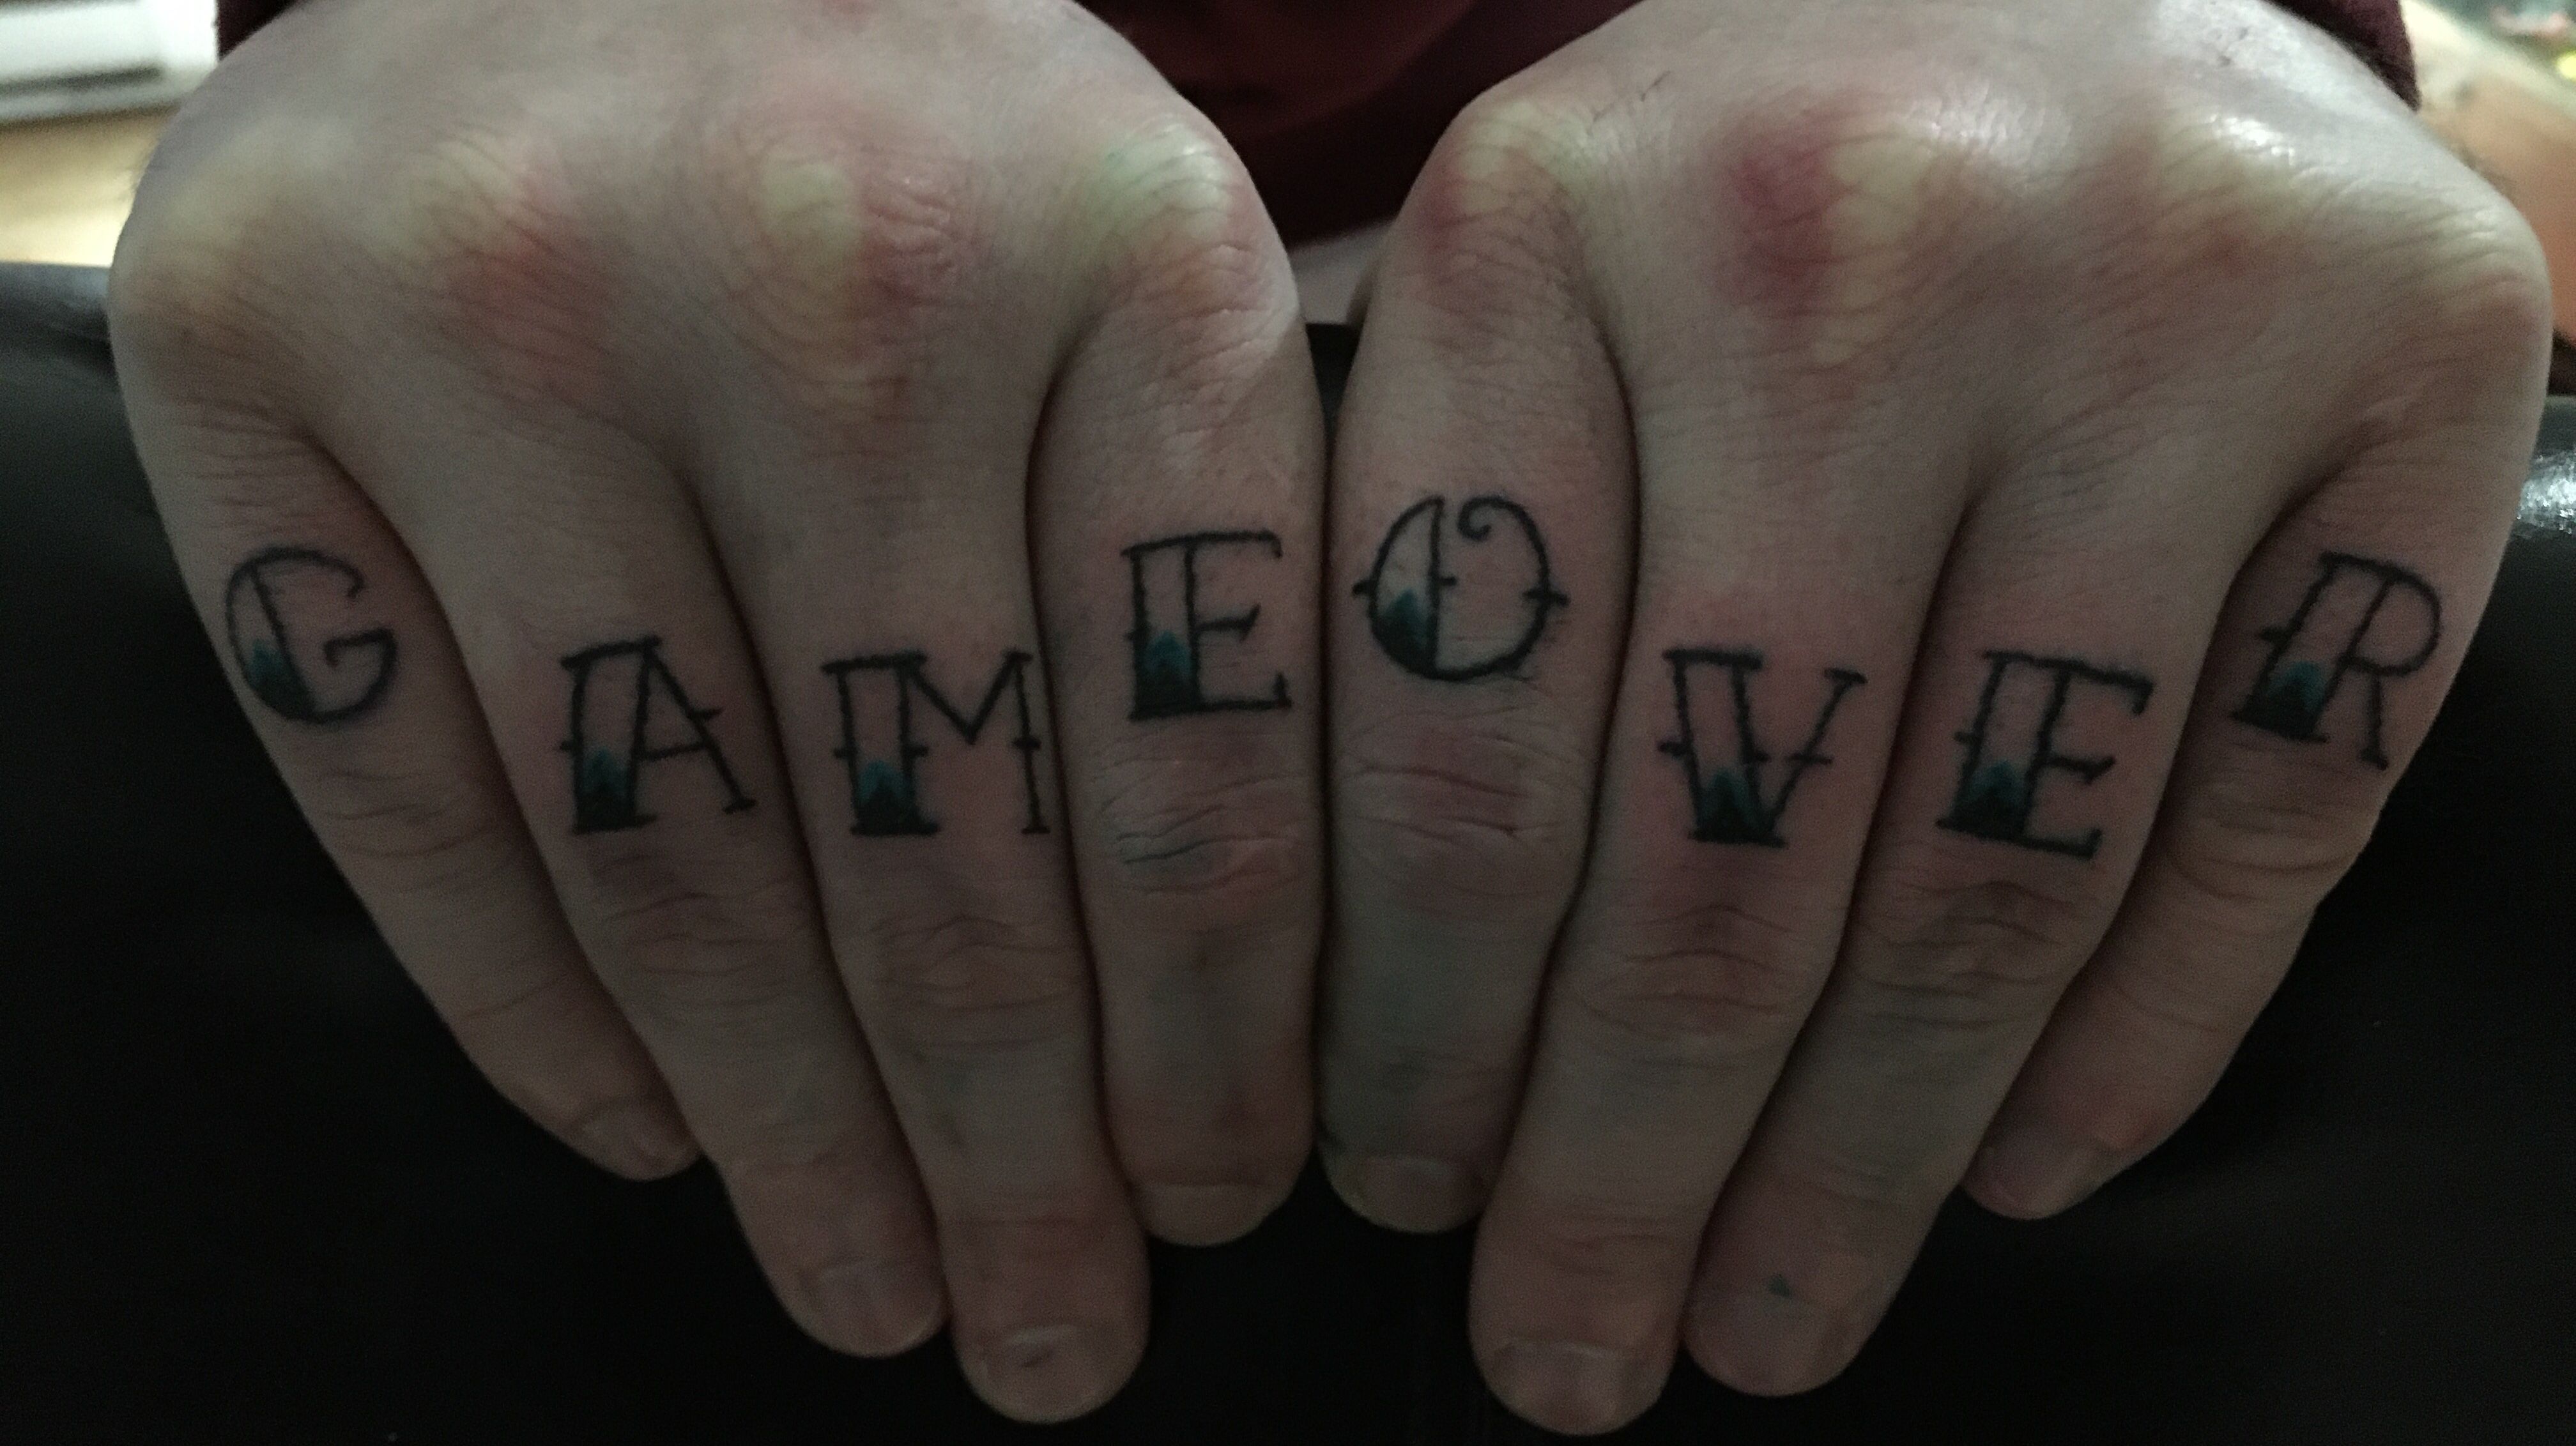 Tattoo uploaded by Arran Cullen Hodgart  Game over knuckles  Tattoodo